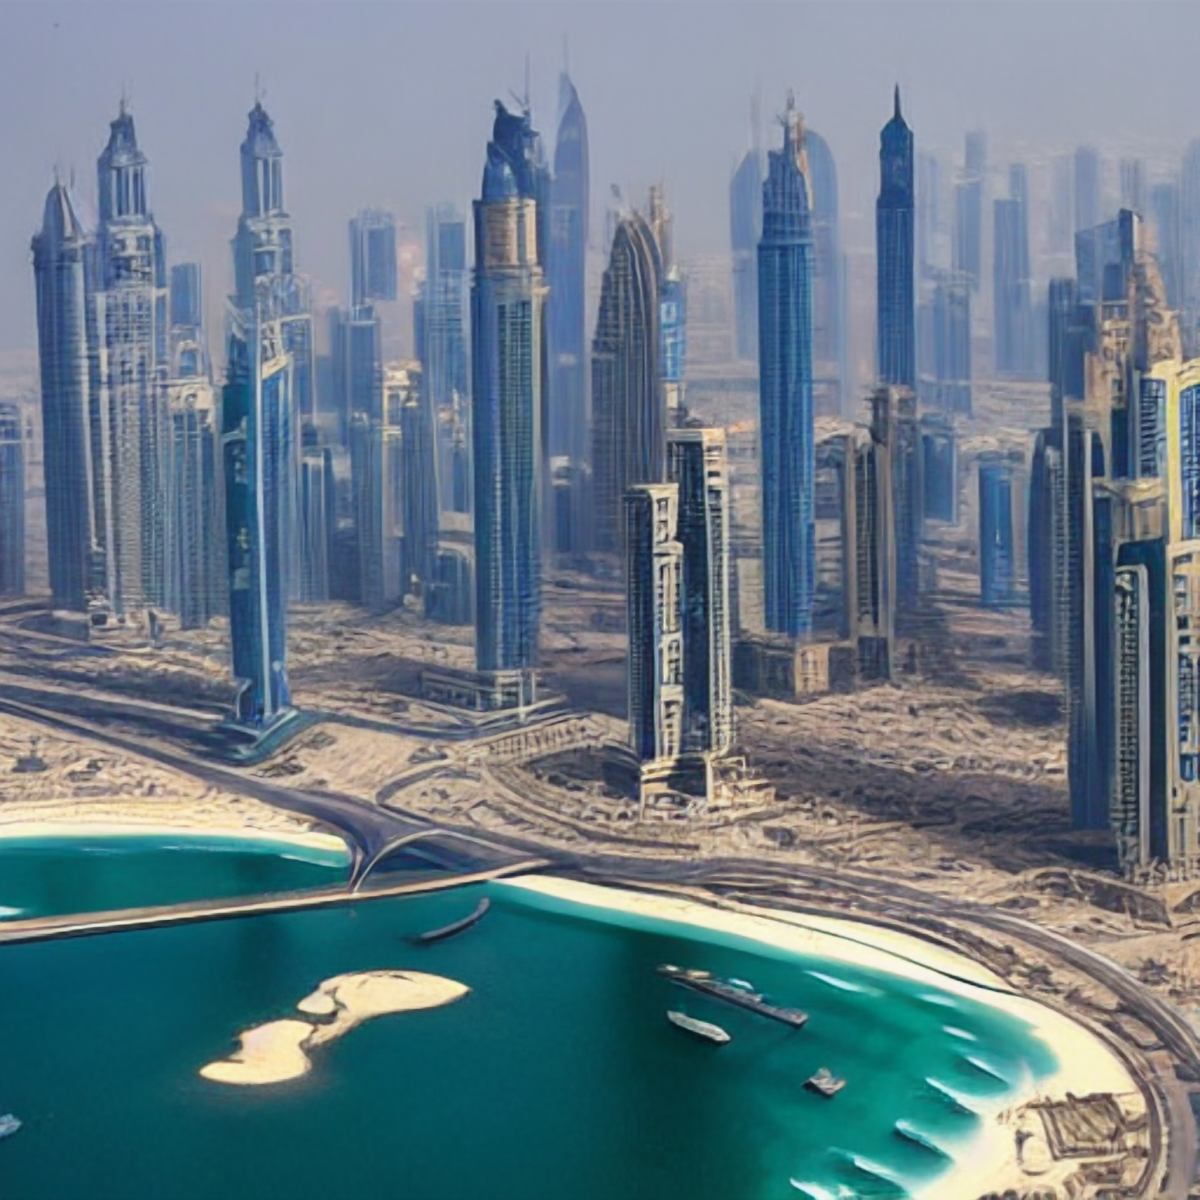 A Few Things to Know Before Visiting Dubai